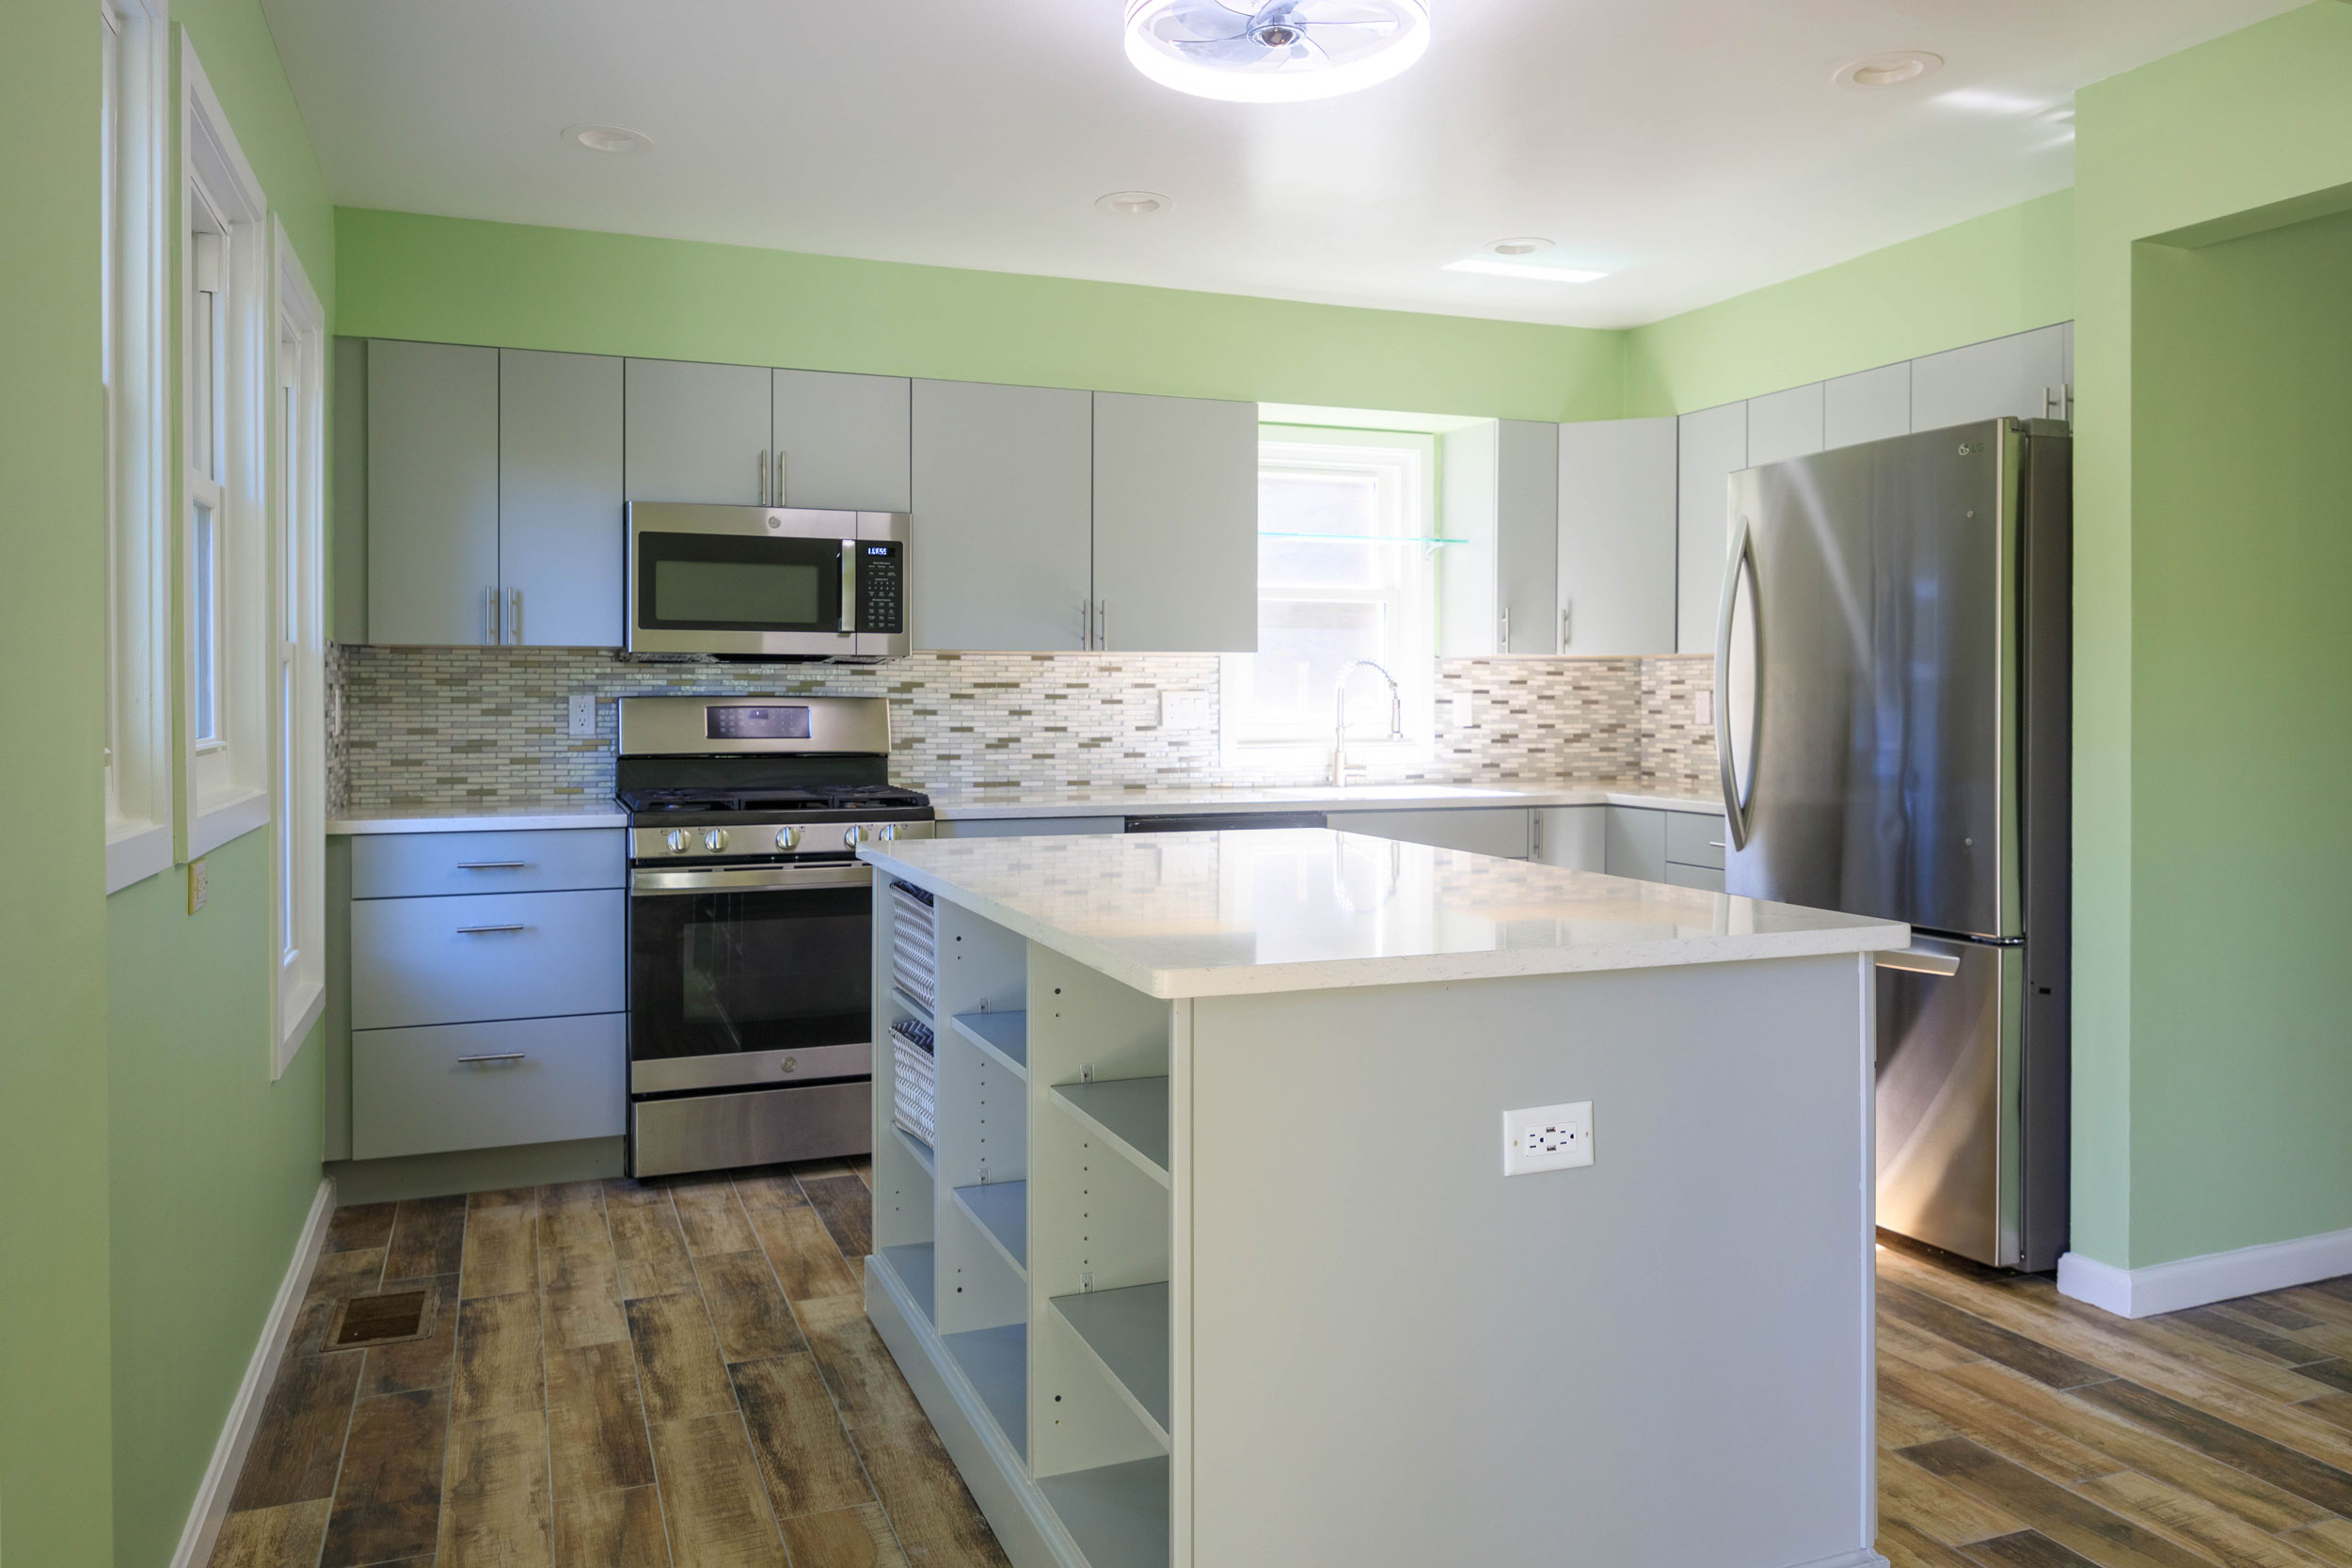 Modern Montgomery County, MD kitchen remodel featuring frameless gray cabinets, quartz countertops, kitchen island with open shelving, backsplash with mosaic glass tiles, wood-look tile floor, recessed lighting, and designer ceiling fan with light.